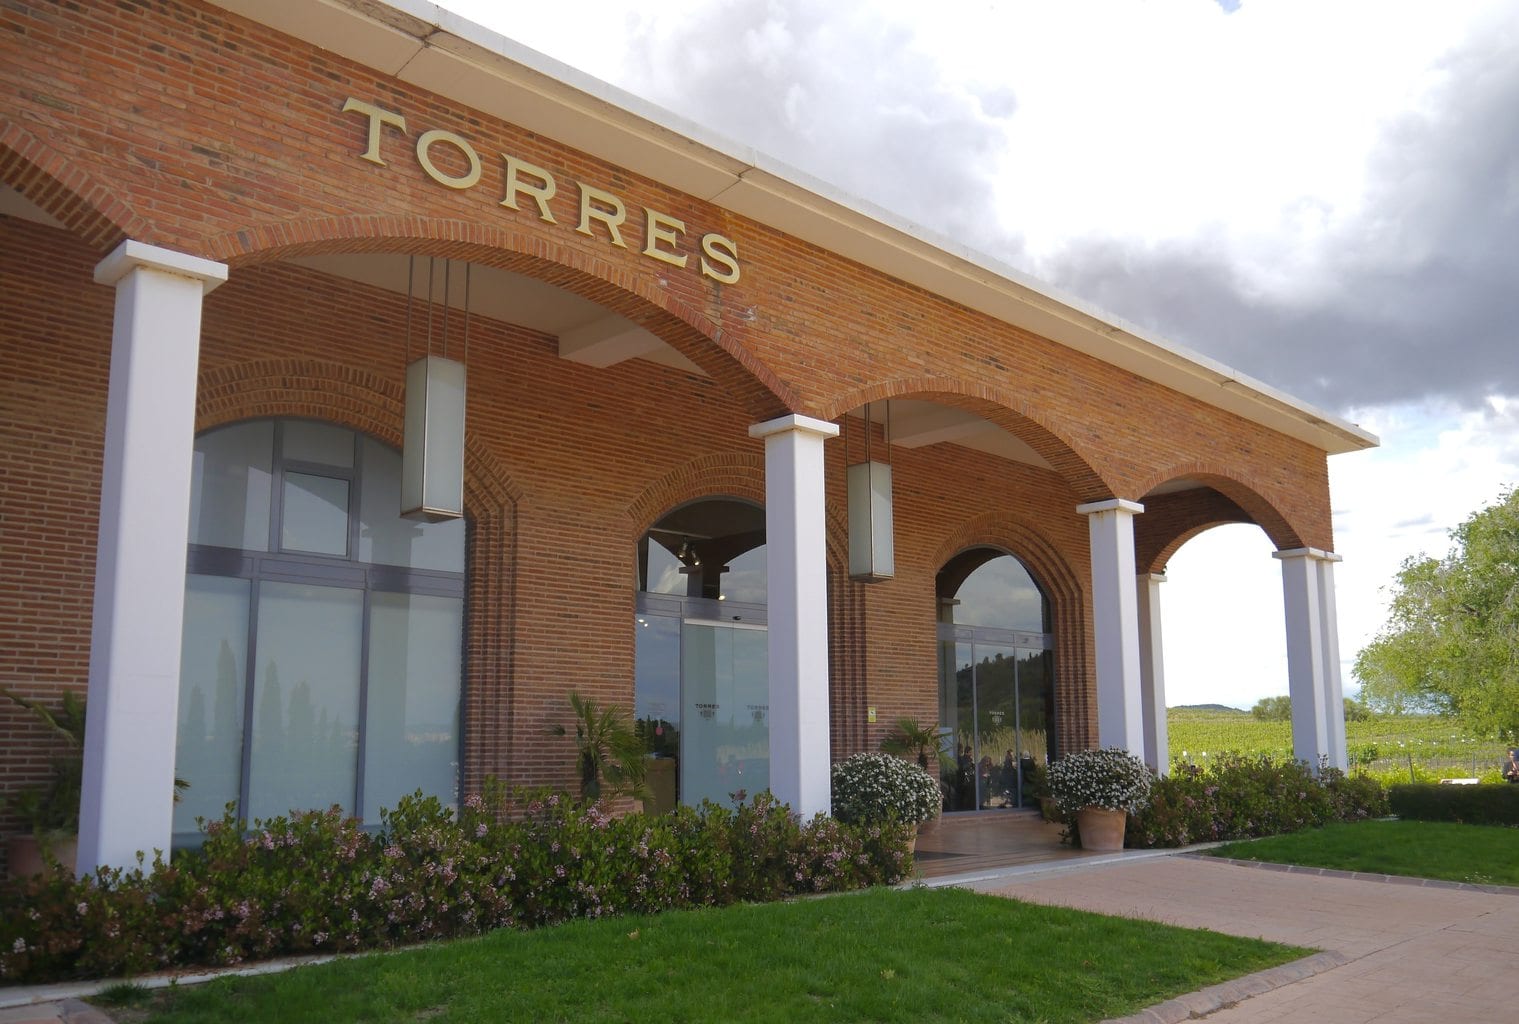 Torres winery tour